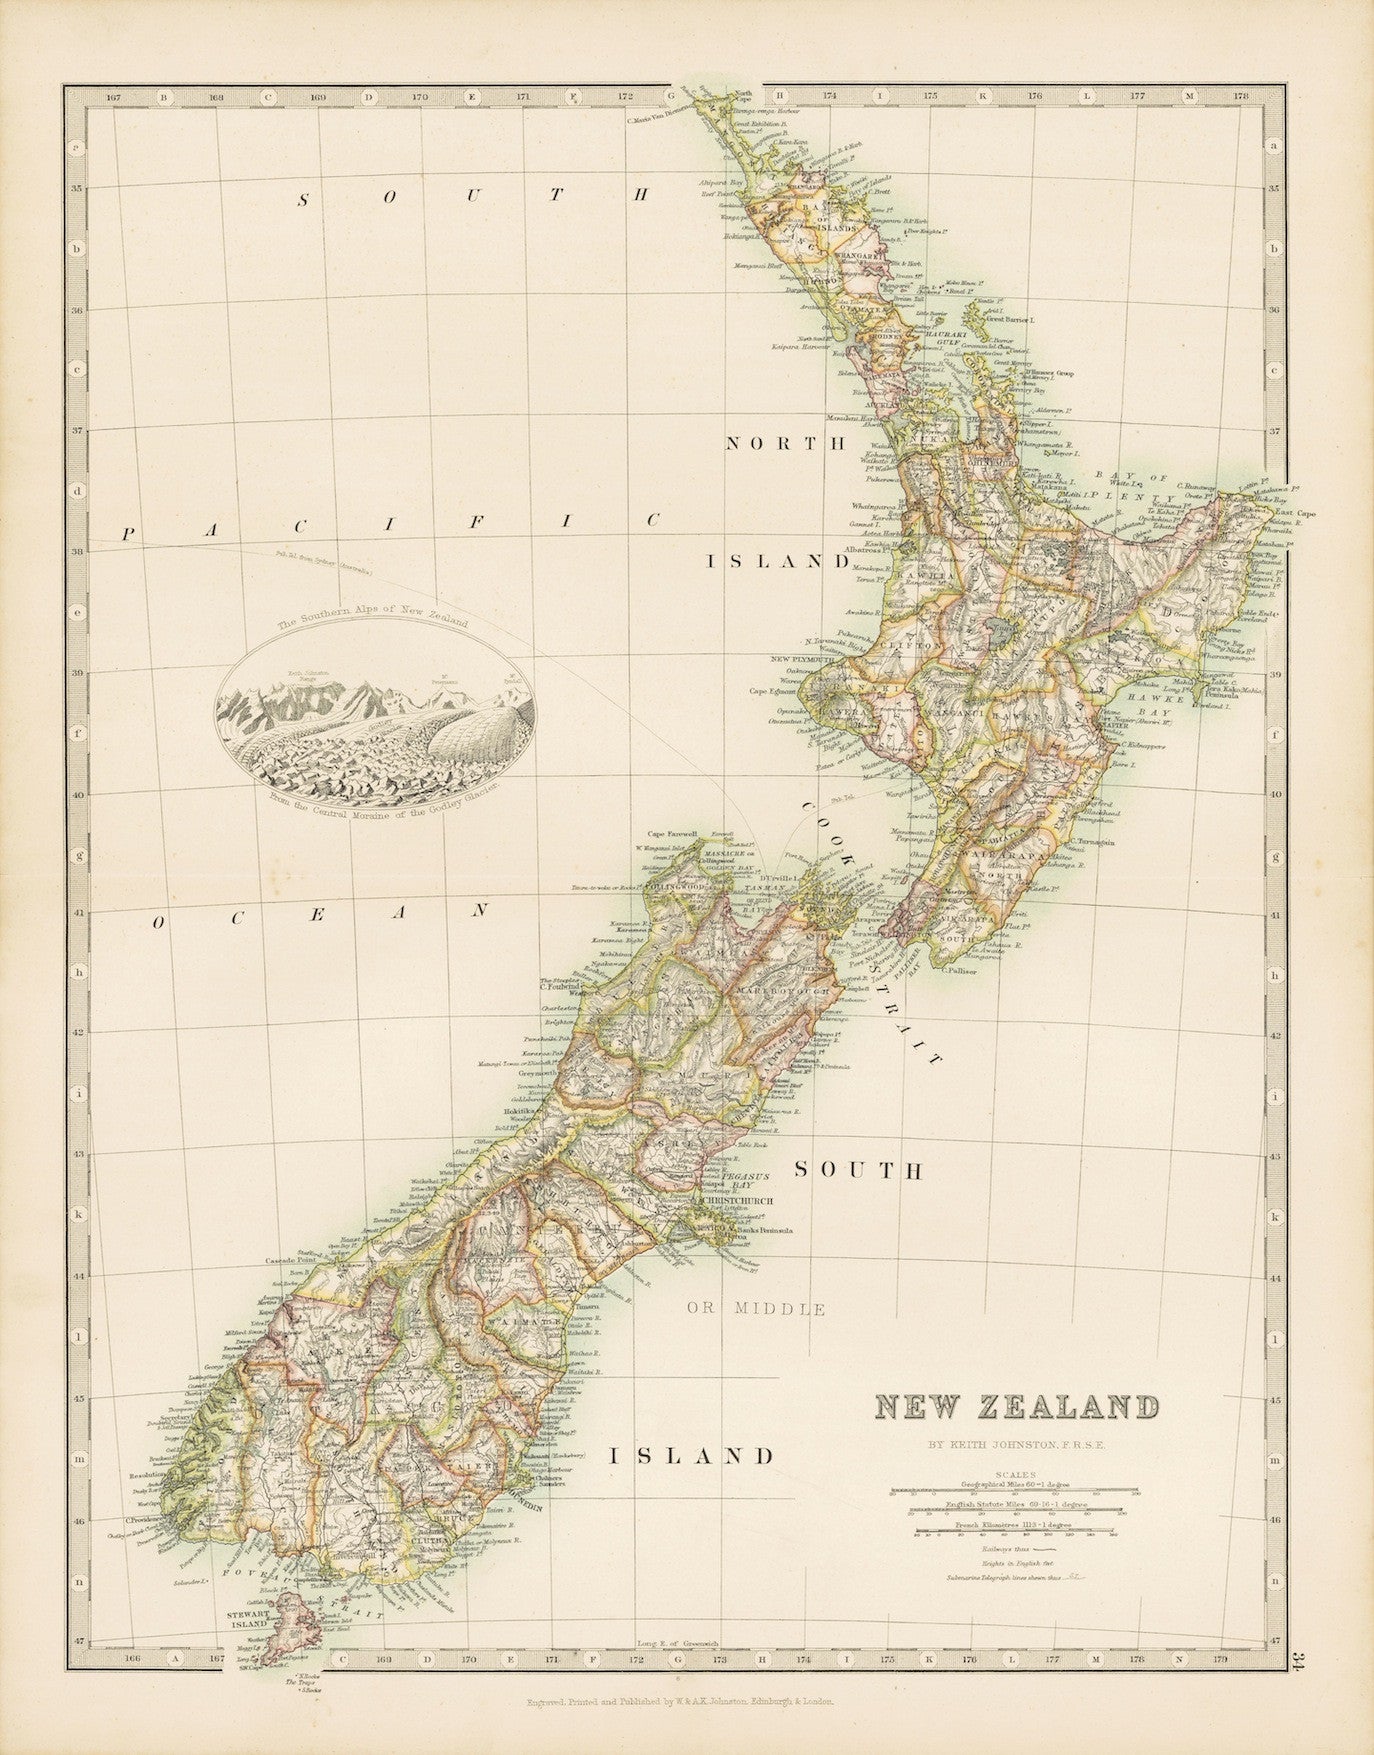 1893 Map of New Zealand [Reproduction]